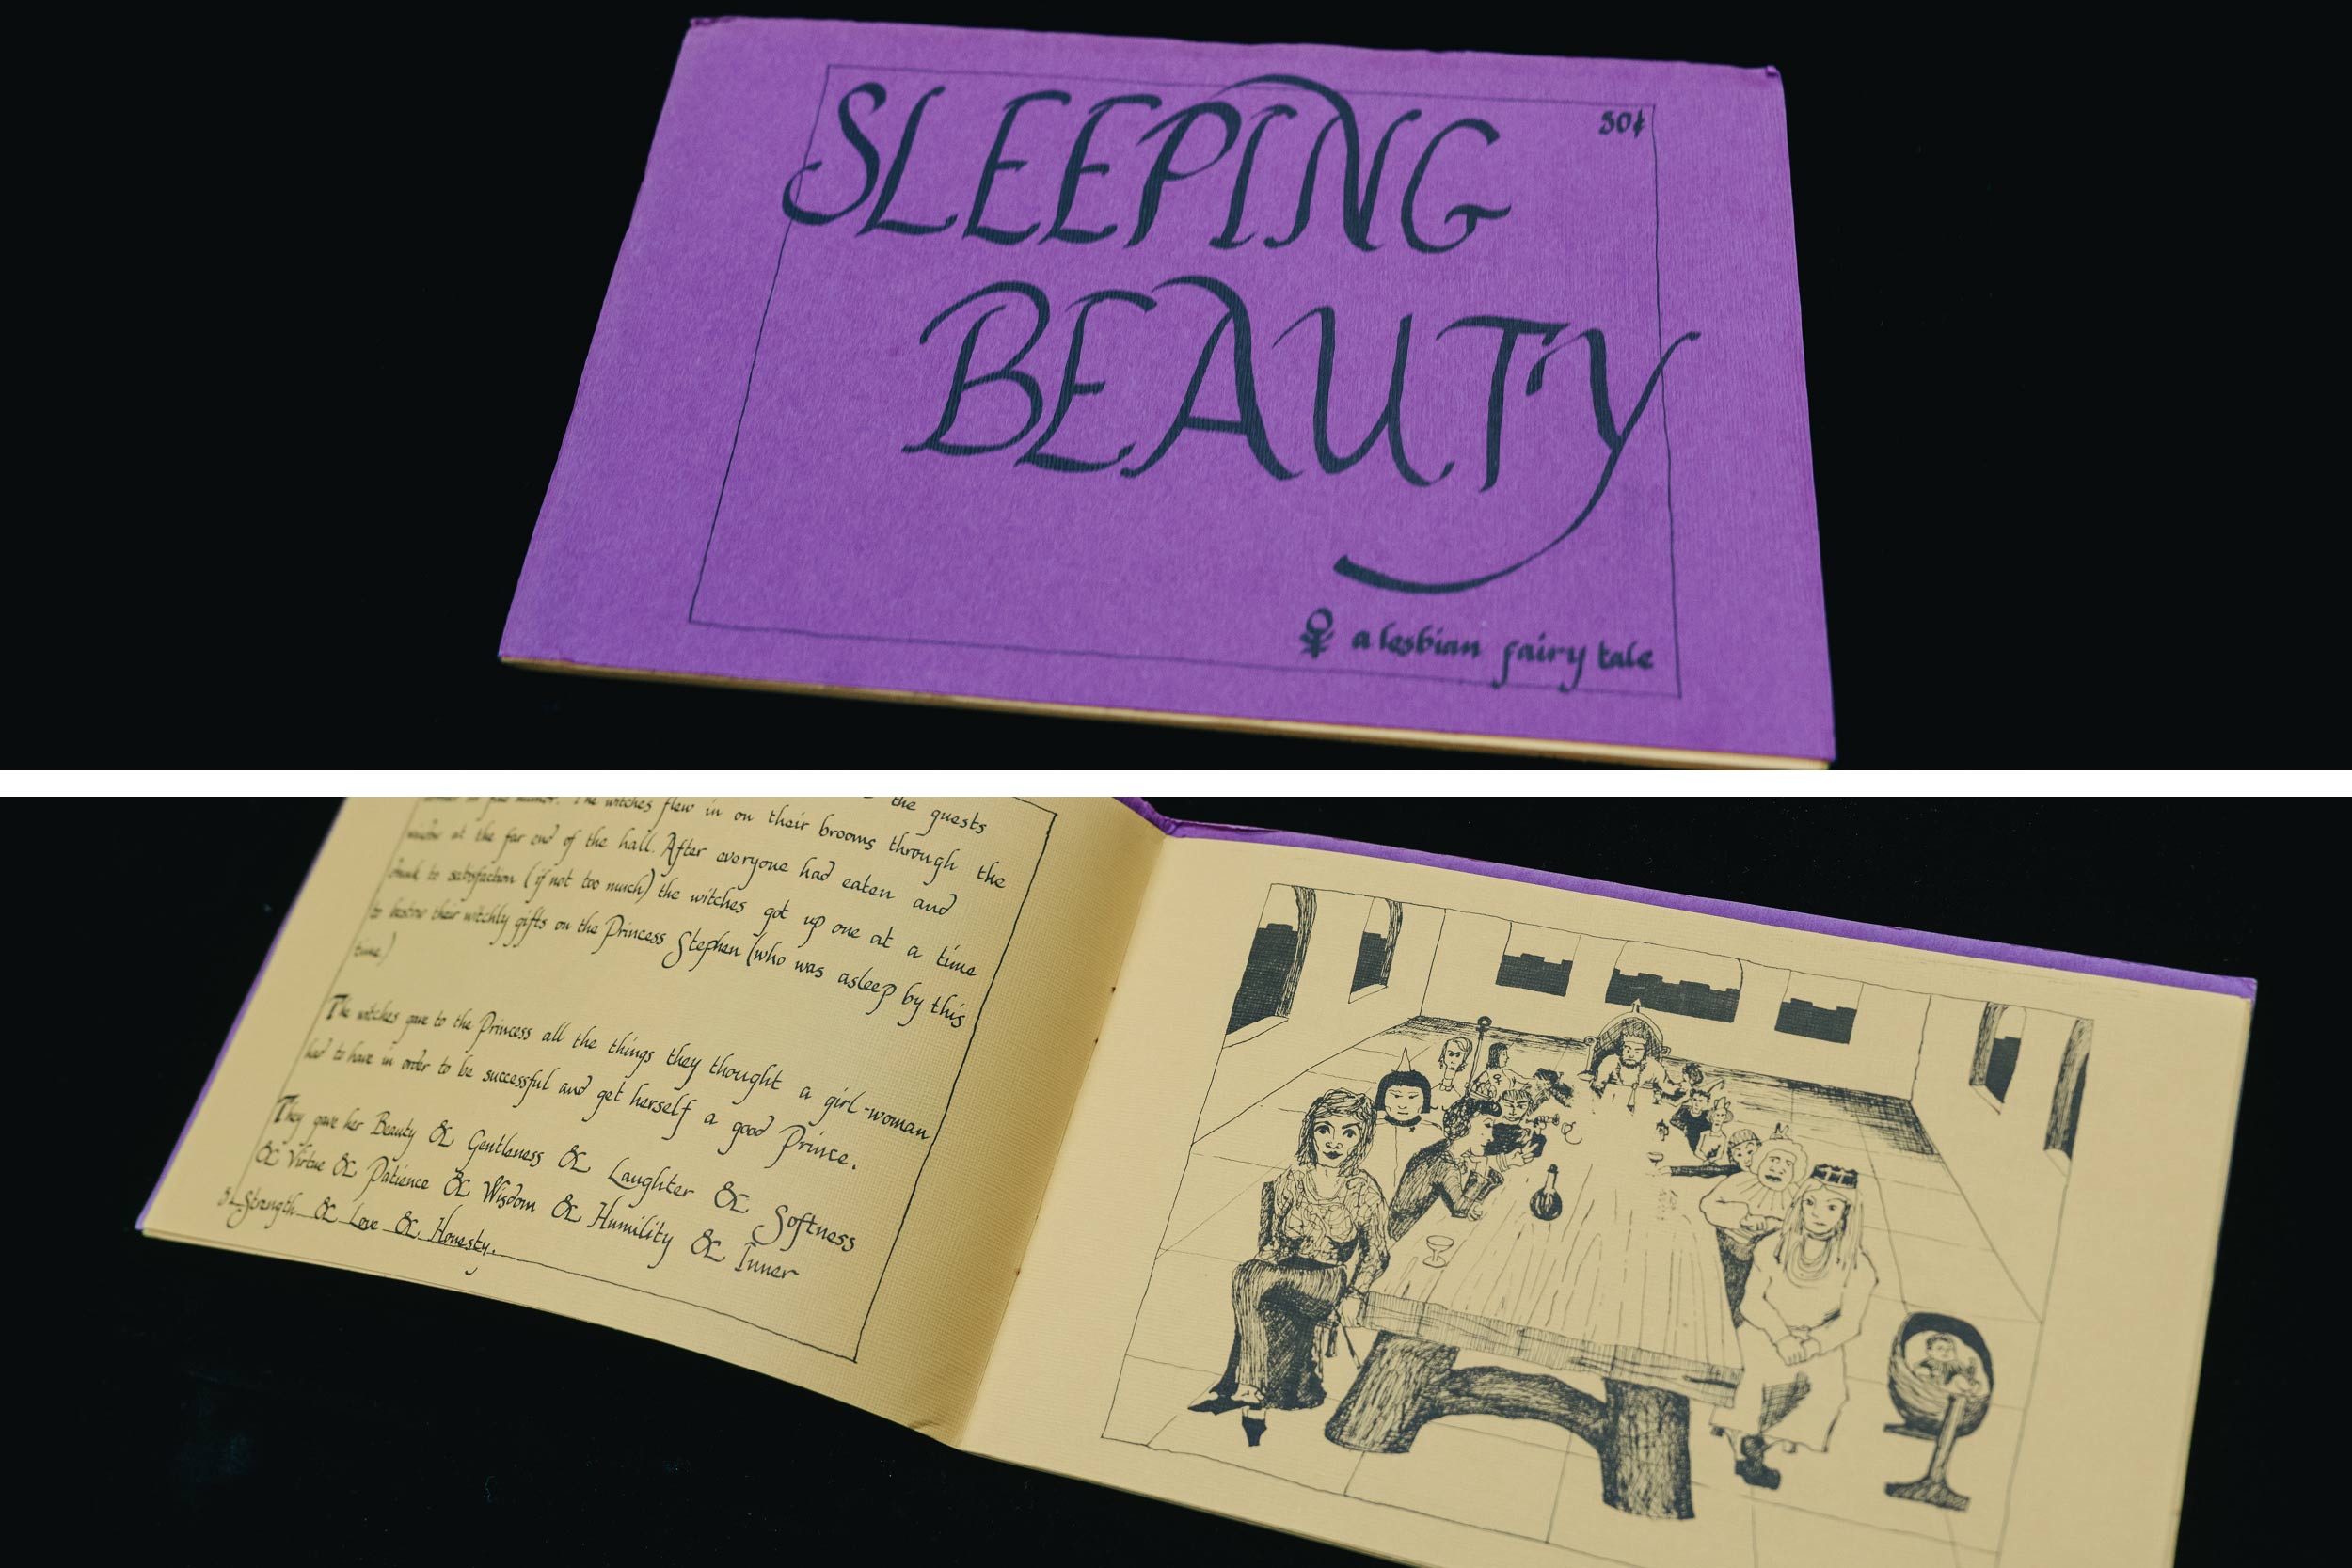 A handmade version of the story of Sleeping Beauty